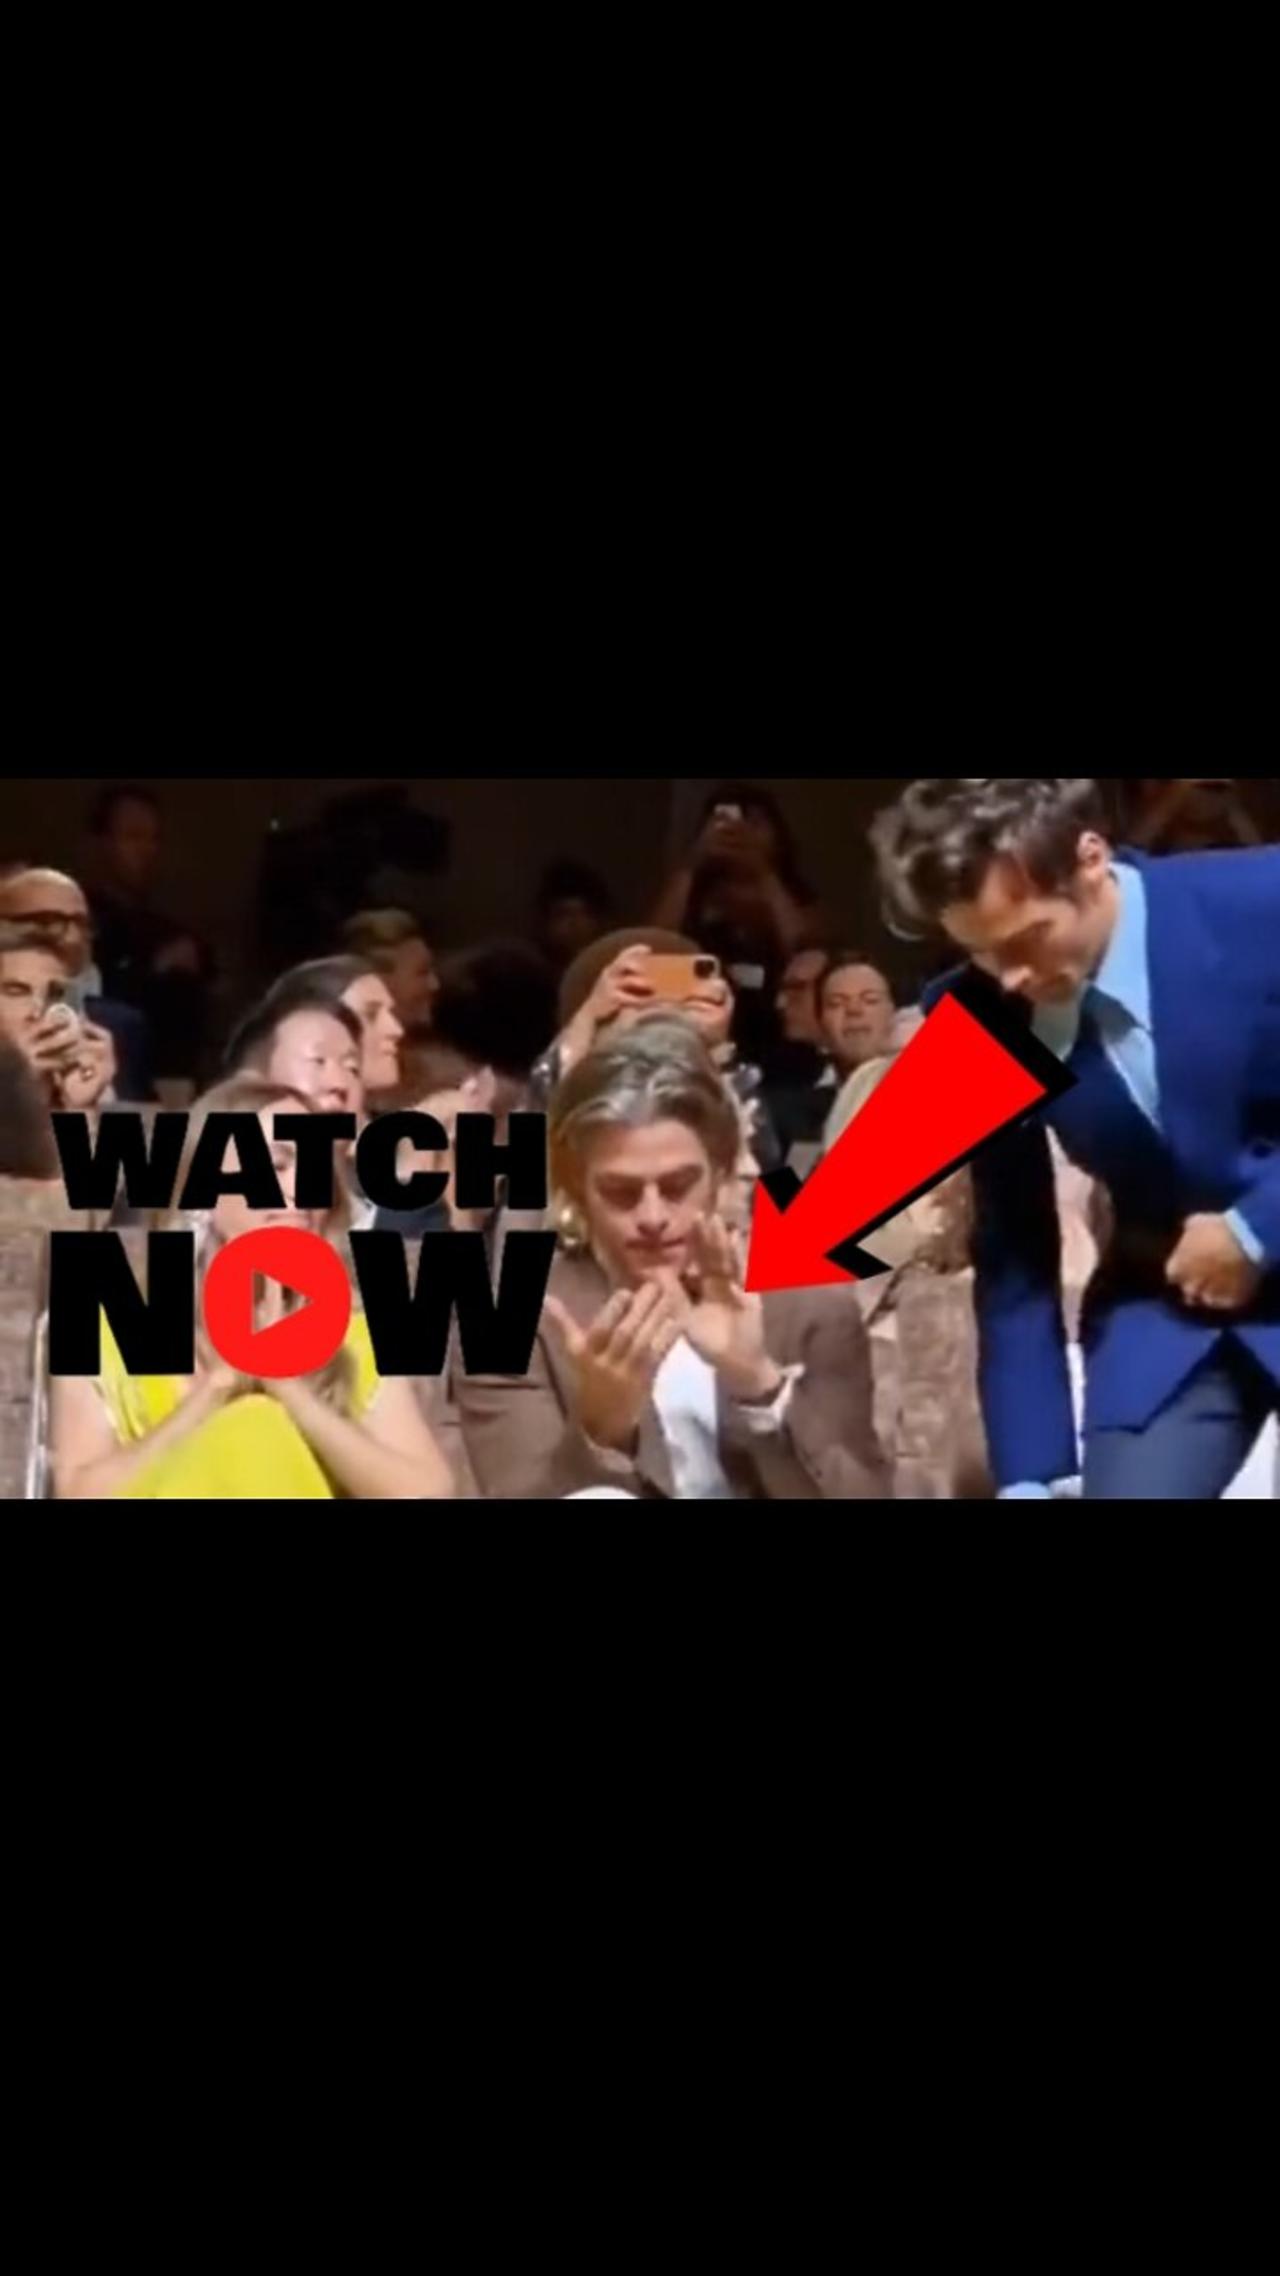 HARRY STYLES SPITTING 《 Did Harry Styles spit on Chris Pine at the ‘Don’t Worry Darling’ premiere? 》